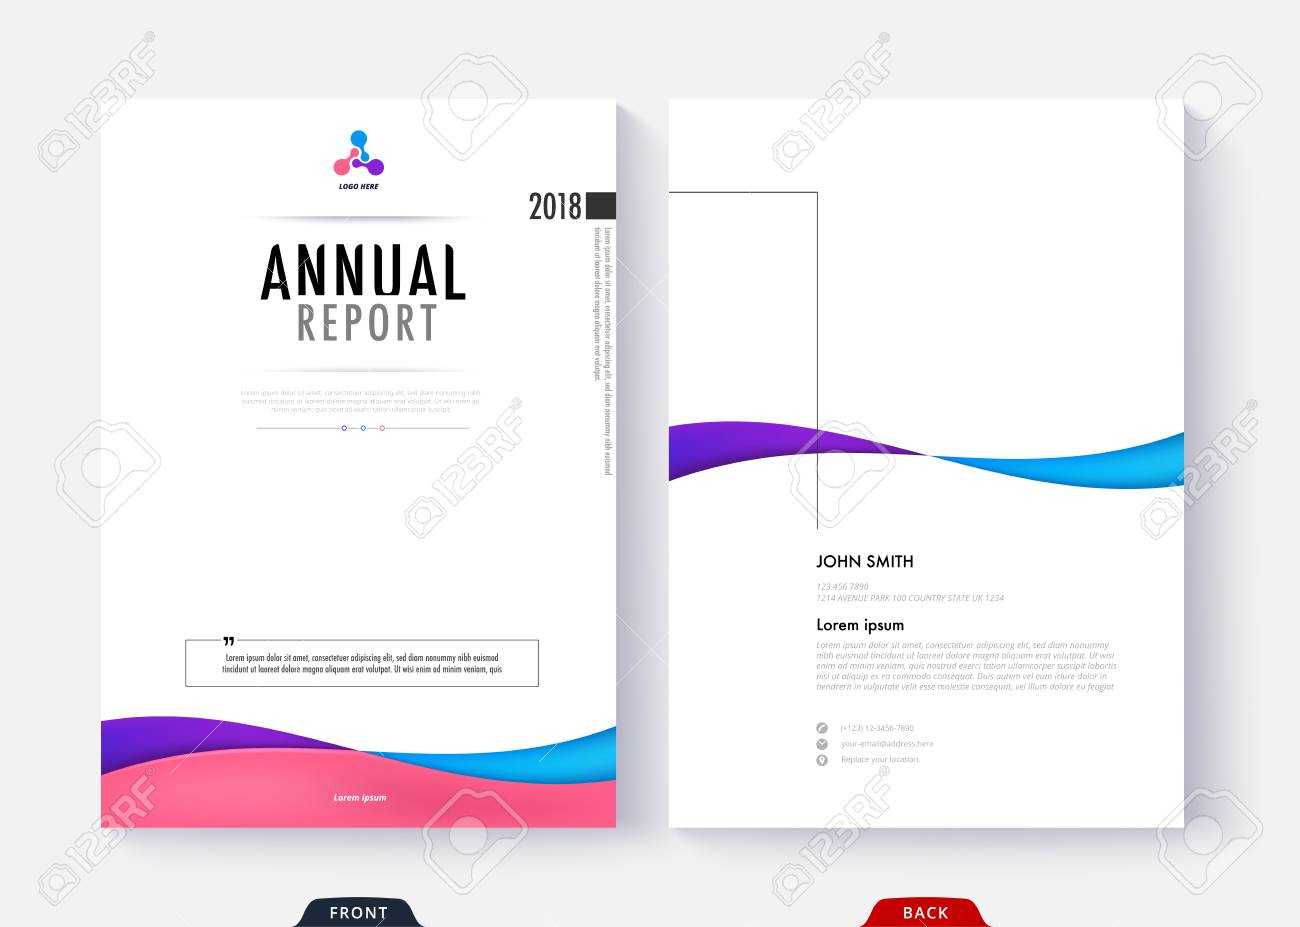 024 Report Cover Page Template Annual Design For Business In Word Annual Report Template